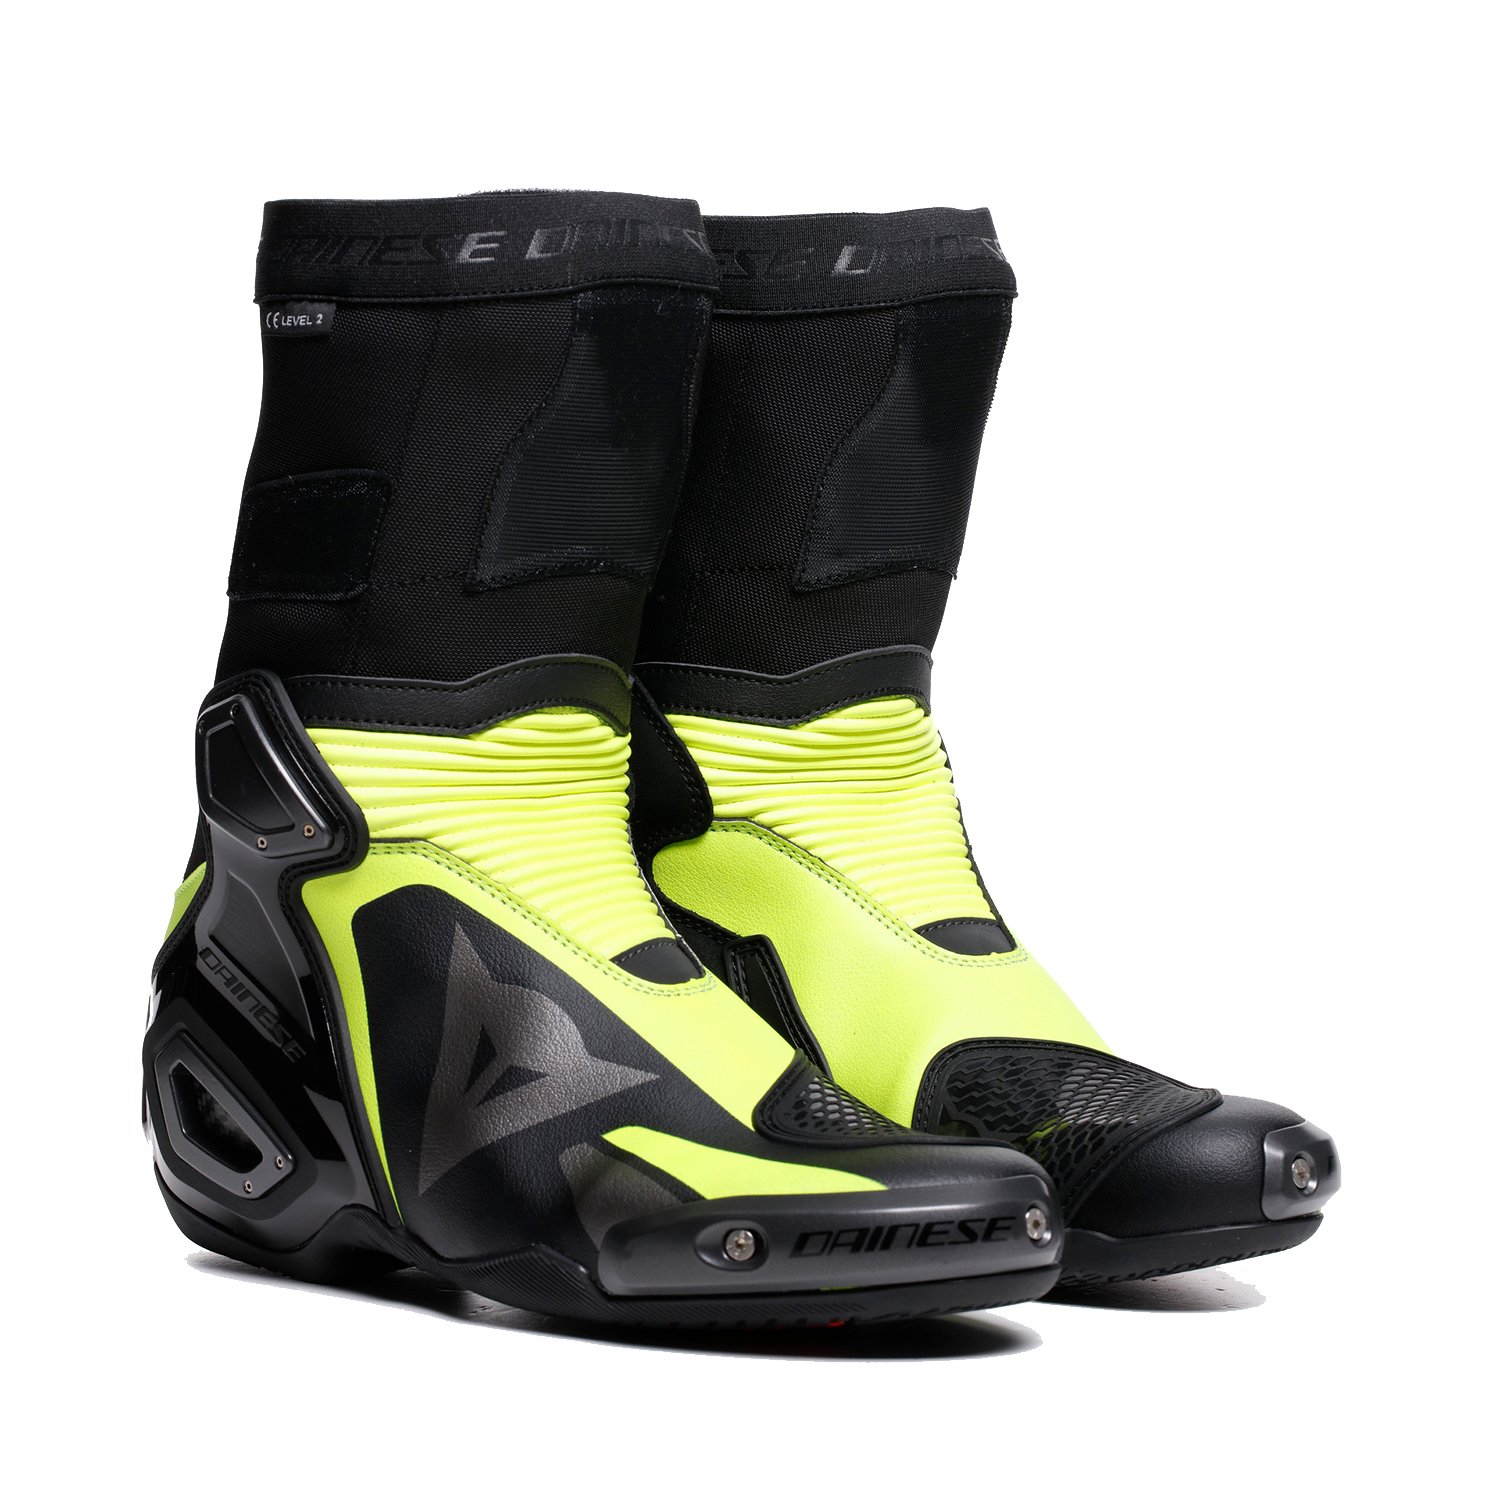 Image of Dainese Axial 2 Boots Black Yellow Fluo Size 40 ID 8051019739452